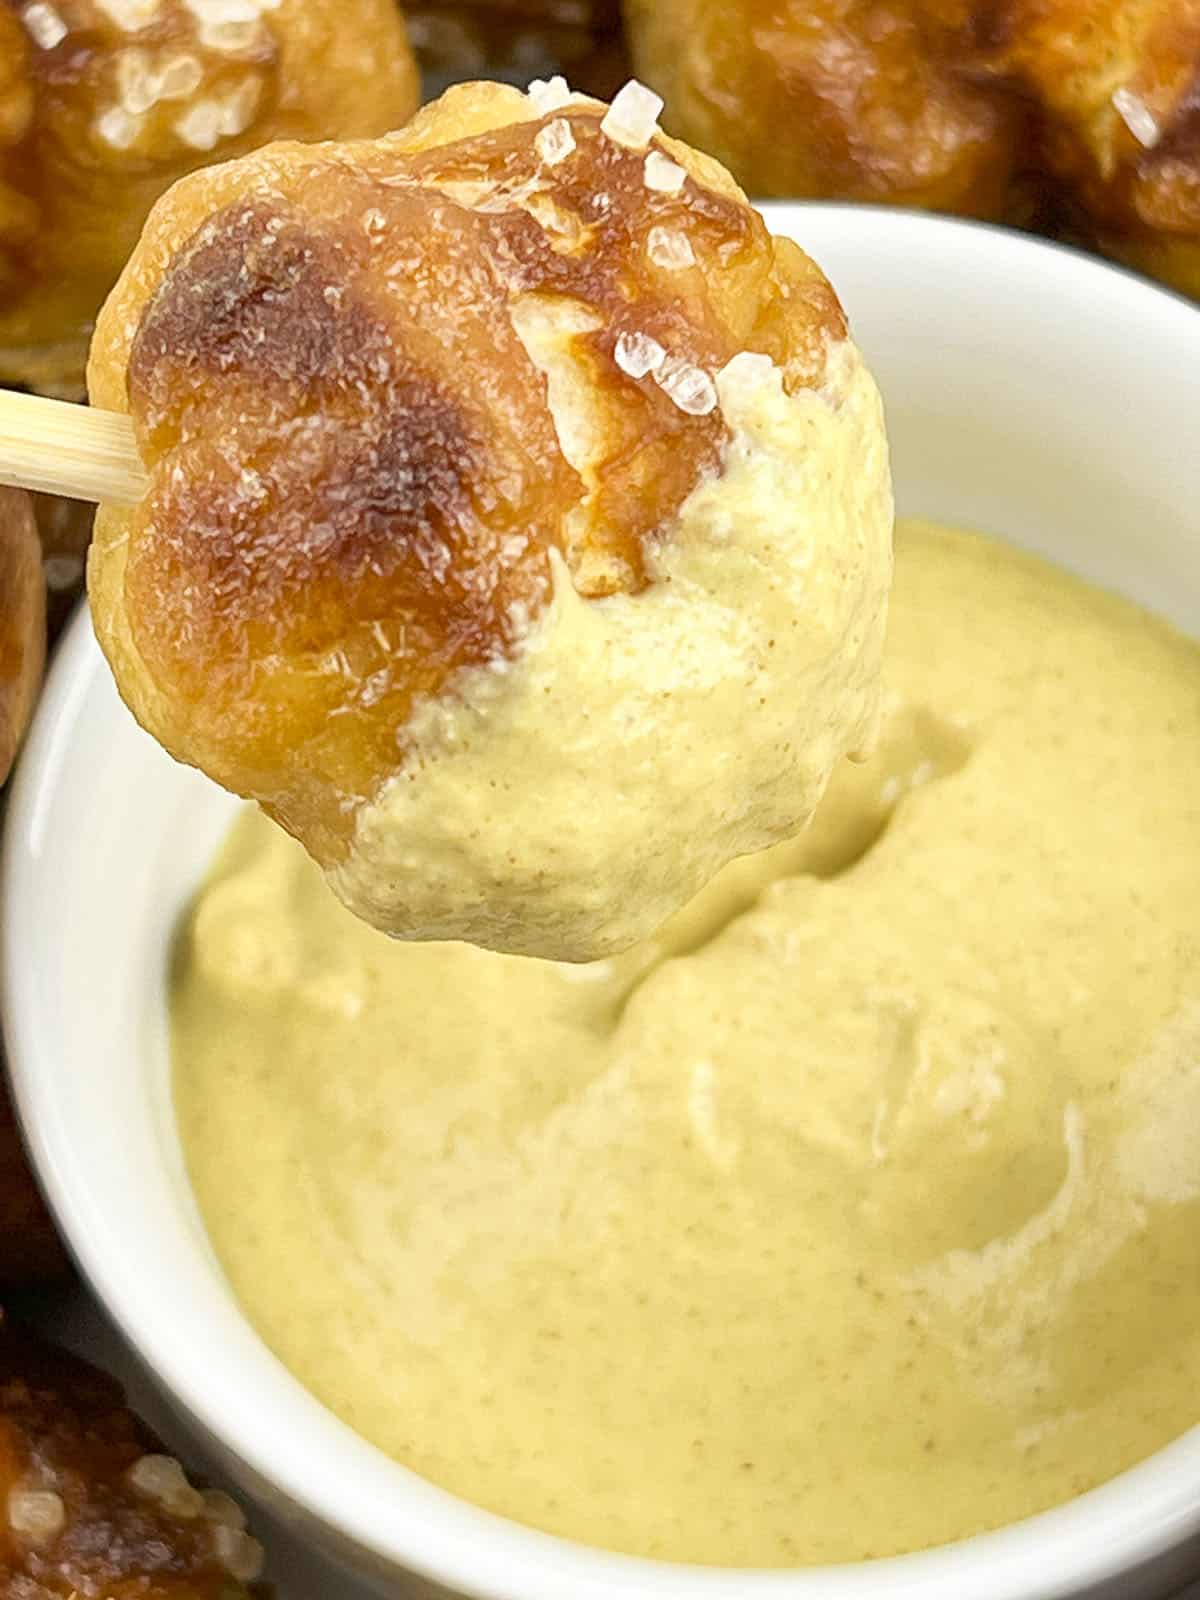 Dipping the pretzel knots in cheese sauce